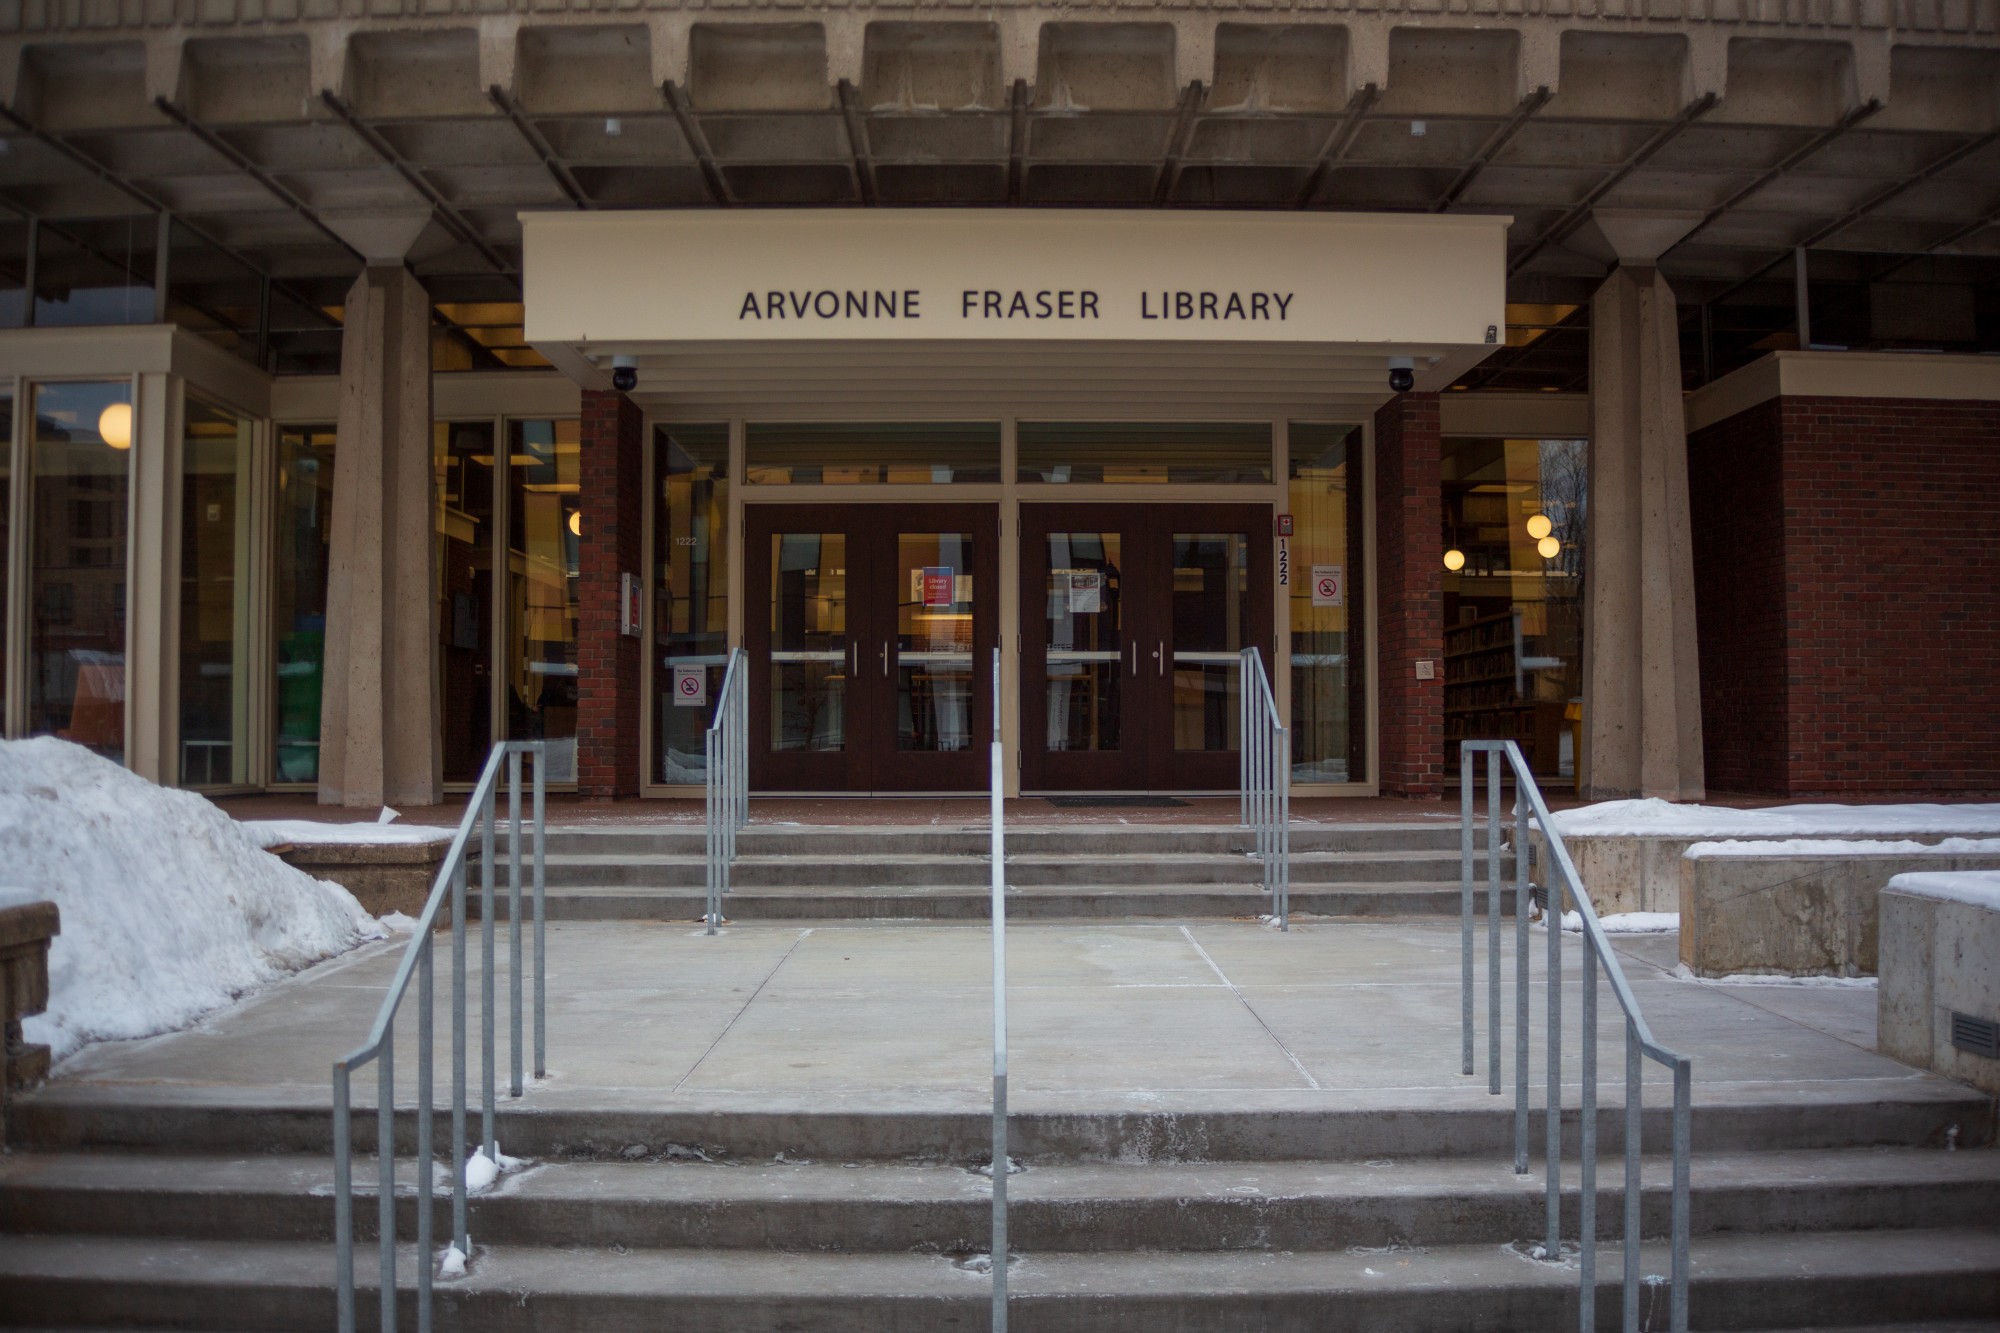 New installments in the Arvonne Fraser Library pay tribute to the buildings original architect, Ralph Rapson and library patron Arvonne Fraser on Friday, Jan. 17.  The newly renovated building is set to open on Jan. 25. (Liam Armstrong / Minnesota Daily)